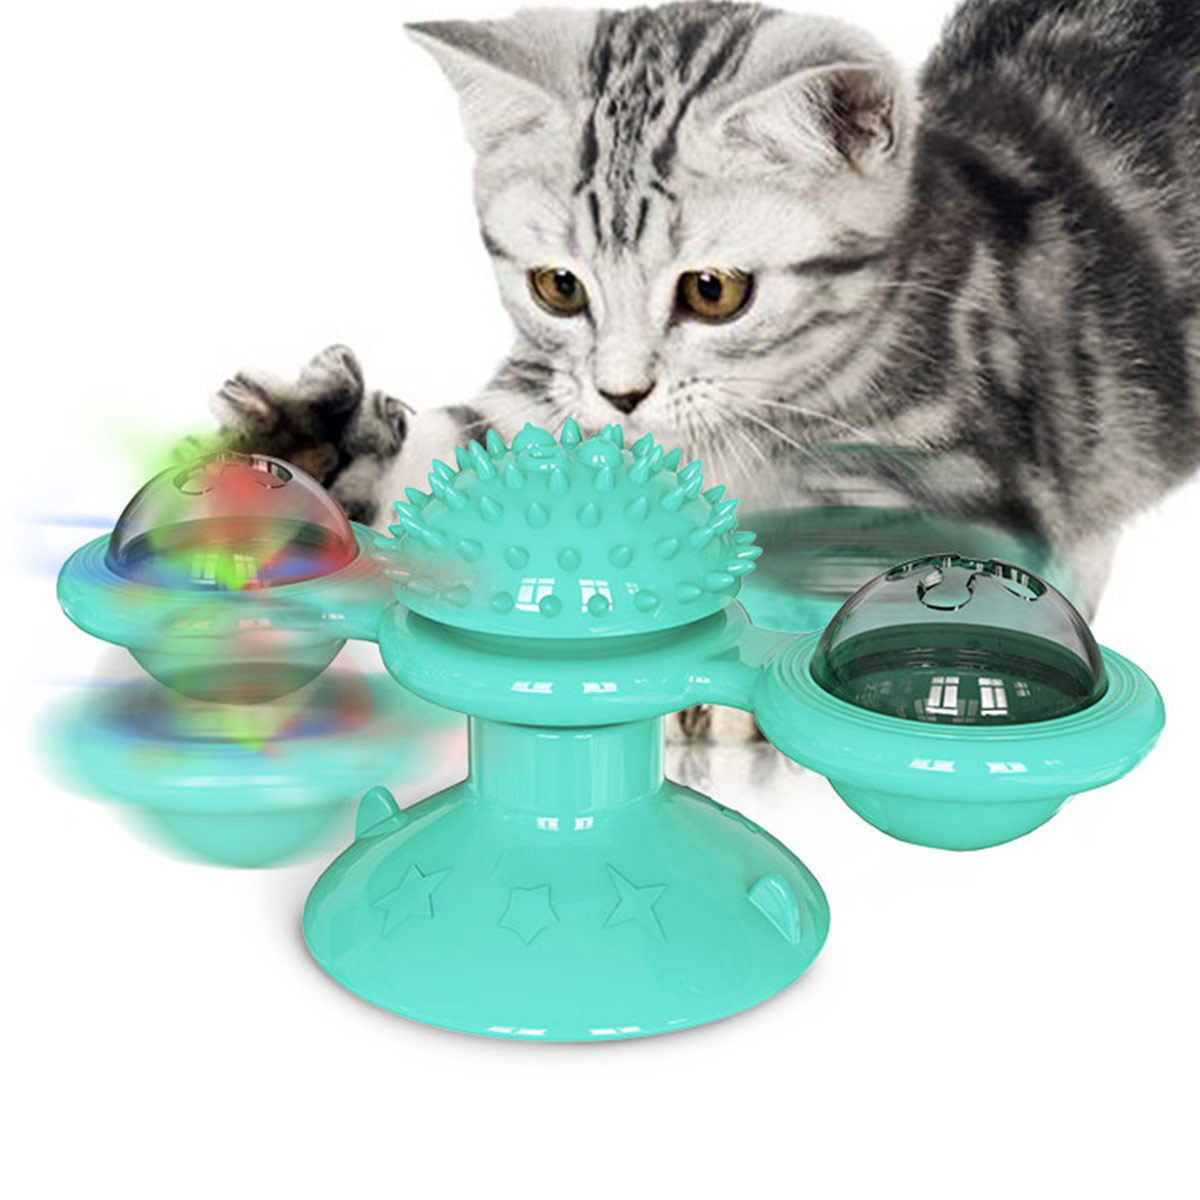 Cat turntable ball cat teaser cat toy windmill